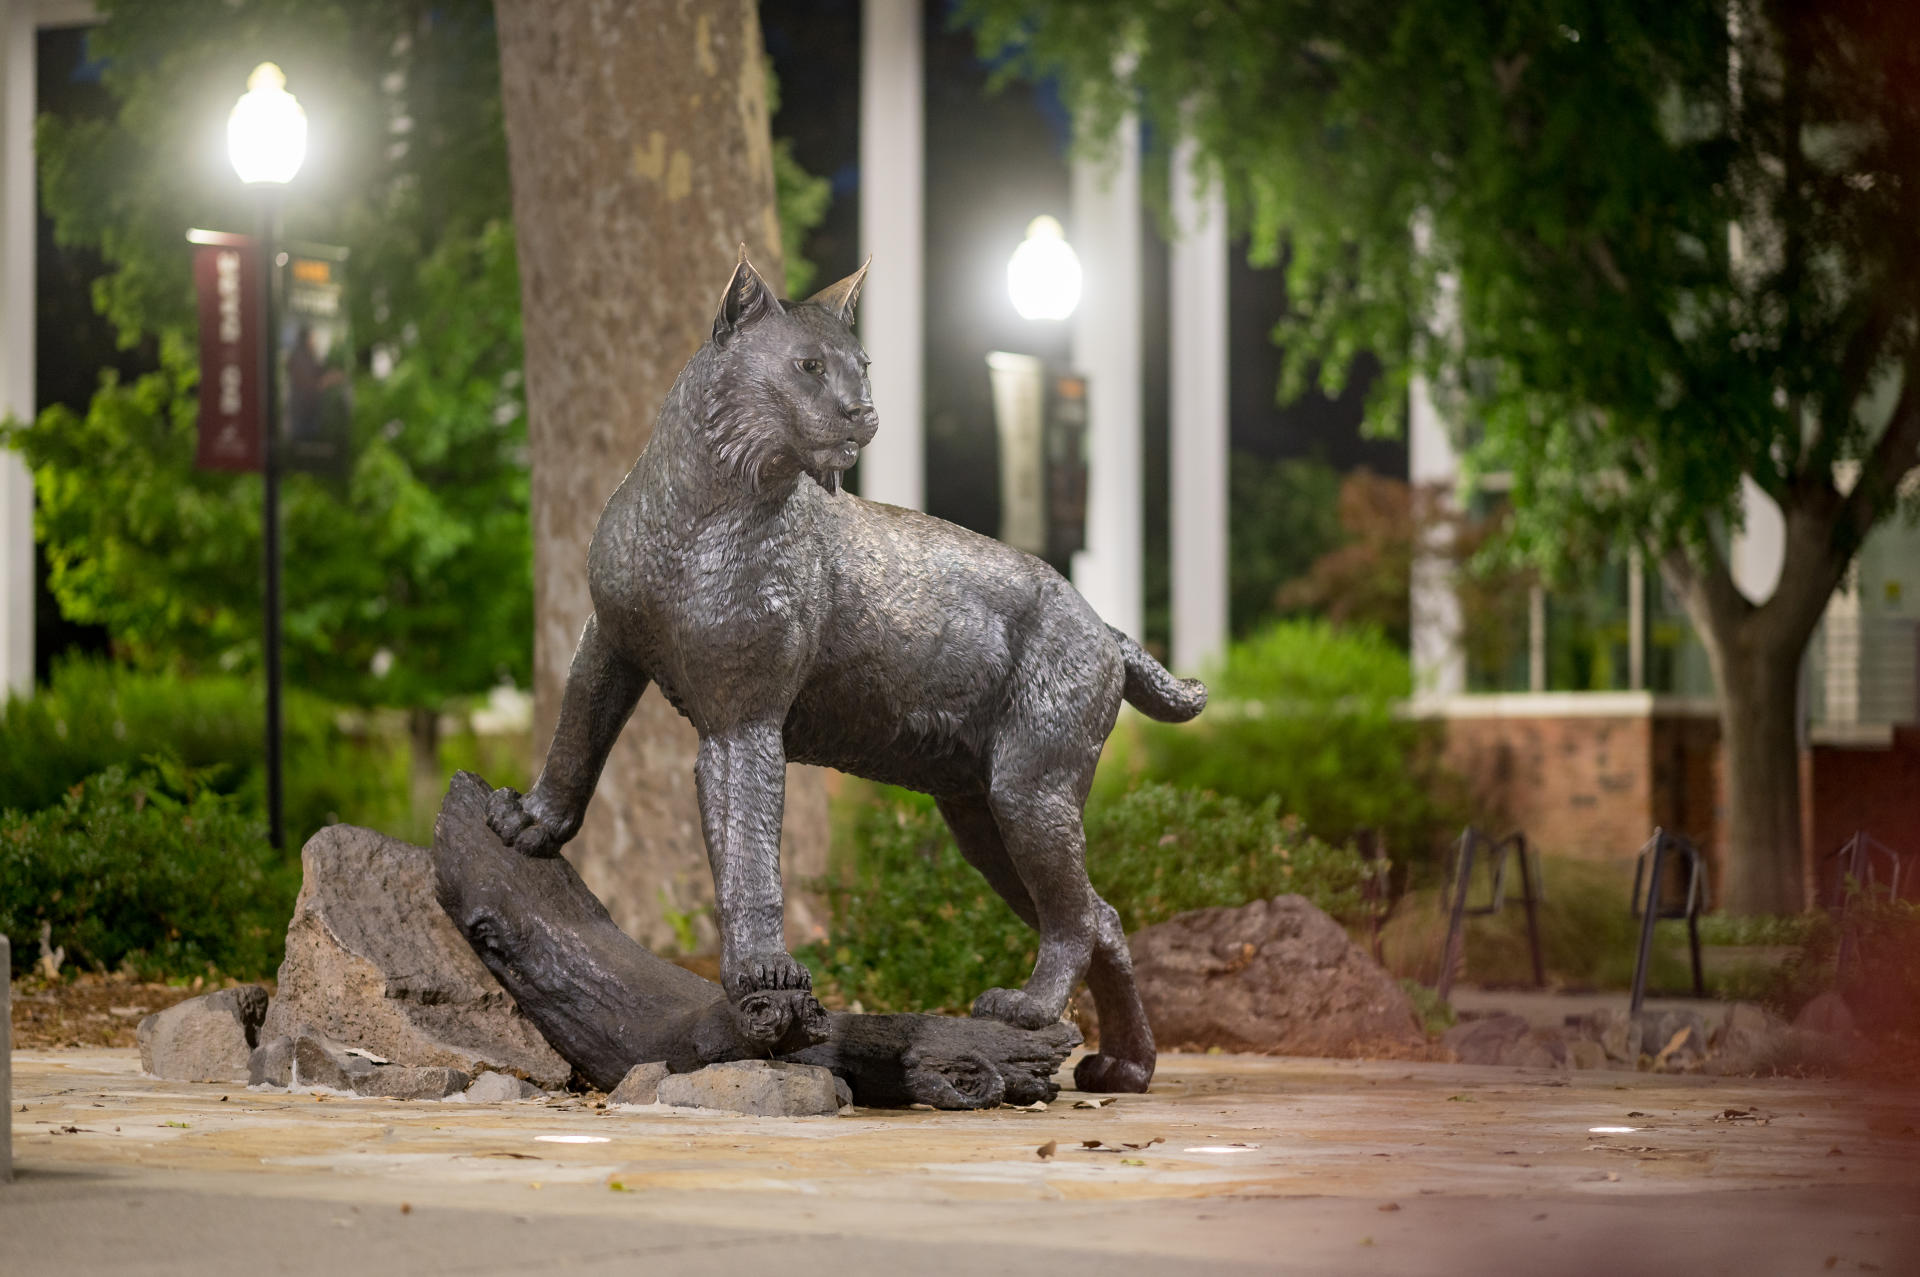 A bronze wildcat statue is perched during the night amid dramatic lighting